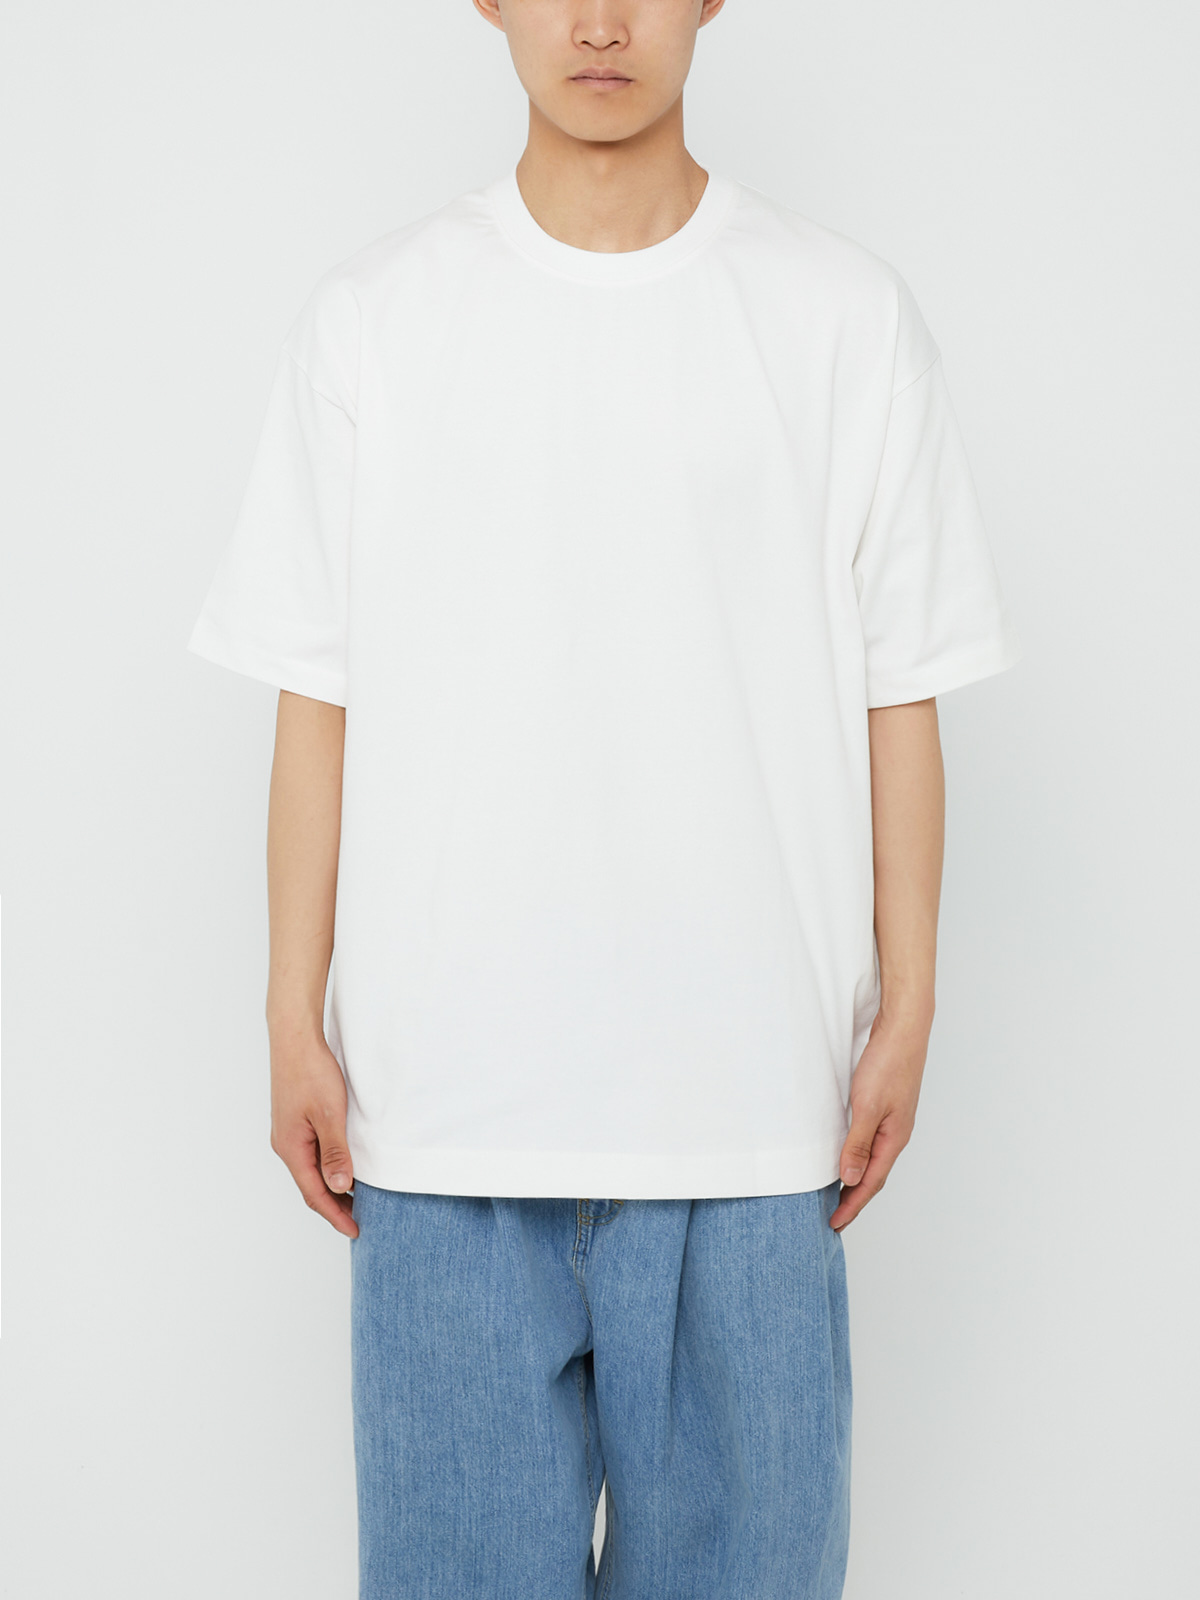 THE DOCUMENT TEE (WHITE)